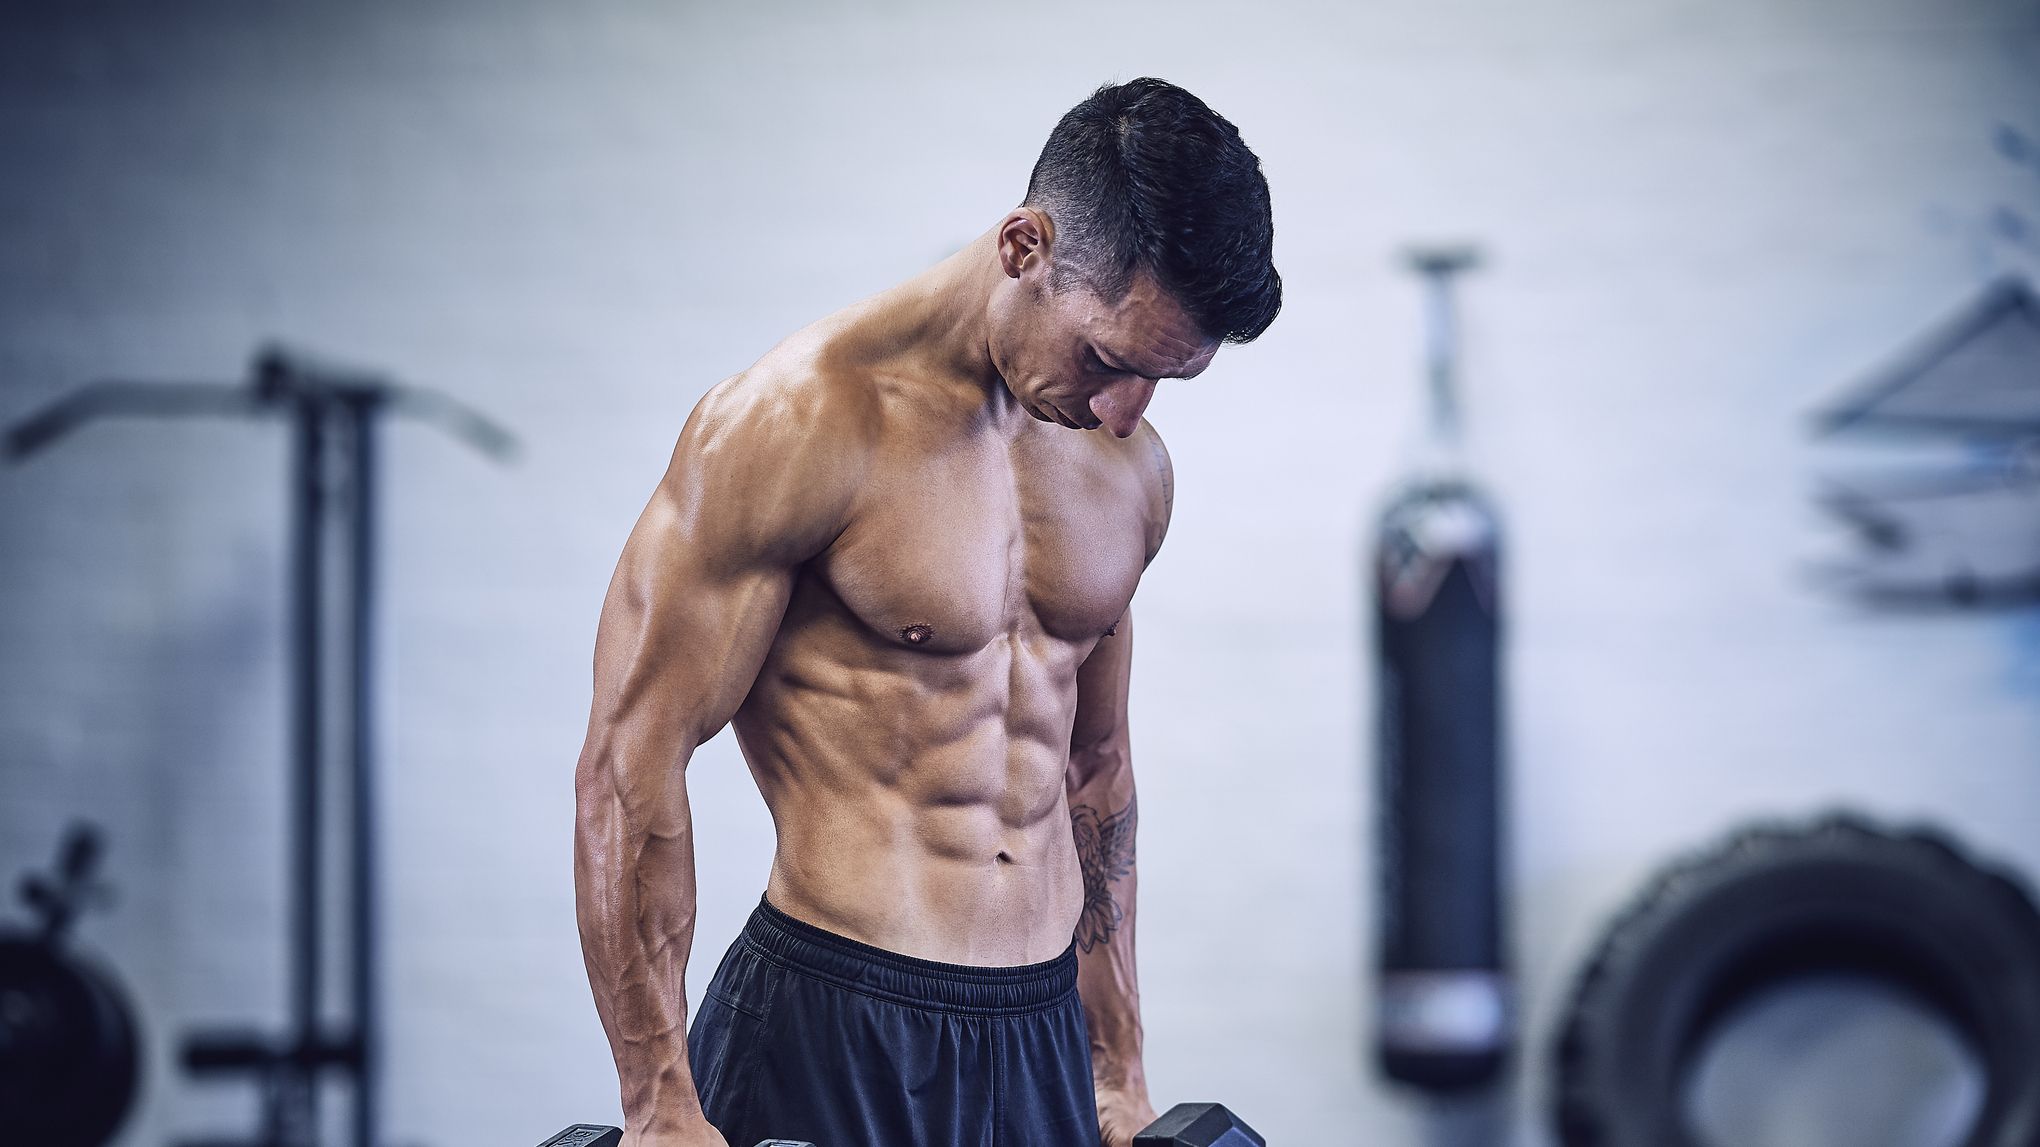 The Rep Ranges for Hypertrophy, Strength and Endurance Workouts